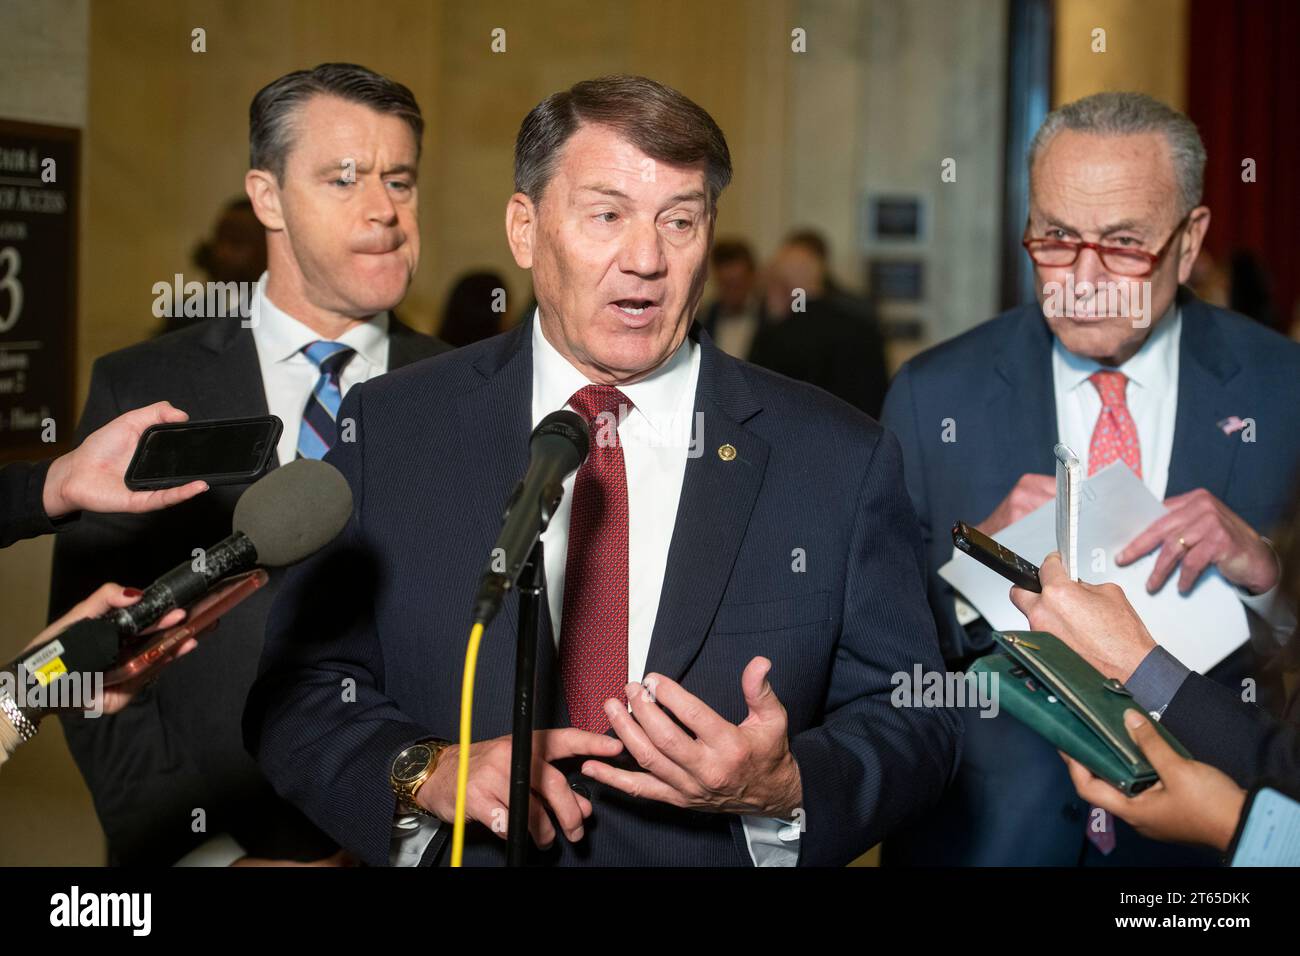 United States Senator Mike Rounds (Republican of South Dakota), center, is joined by United States Senator Todd Young (Republican of Indiana), left, and United States Senate Majority Leader Chuck Schumer (Democrat of New York), right, for a press briefing in between panels of the Senate bipartisan AI Insight Forums in the Russell Senate Office Building in Washington, DC, Wednesday, November 8, 2023. The AI Insight Forums seek to bring together AI stakeholders to supercharge the Congressional process to develop bipartisan artificial intelligence legislation. The Forums have focused on capitaliz Stock Photo